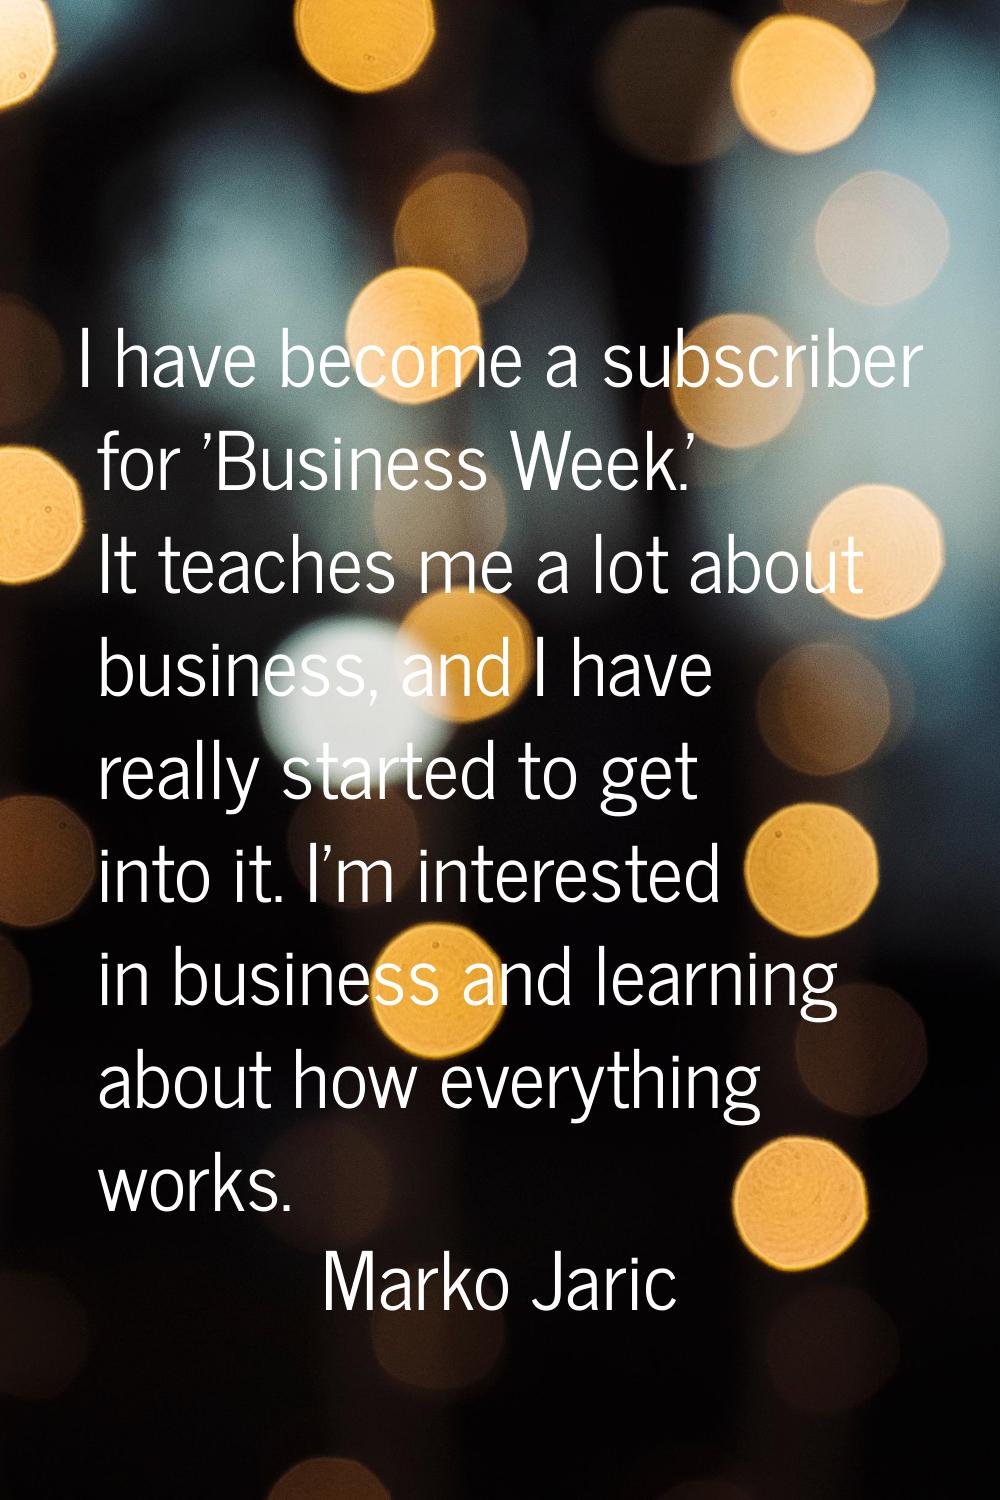 I have become a subscriber for 'Business Week.' It teaches me a lot about business, and I have real